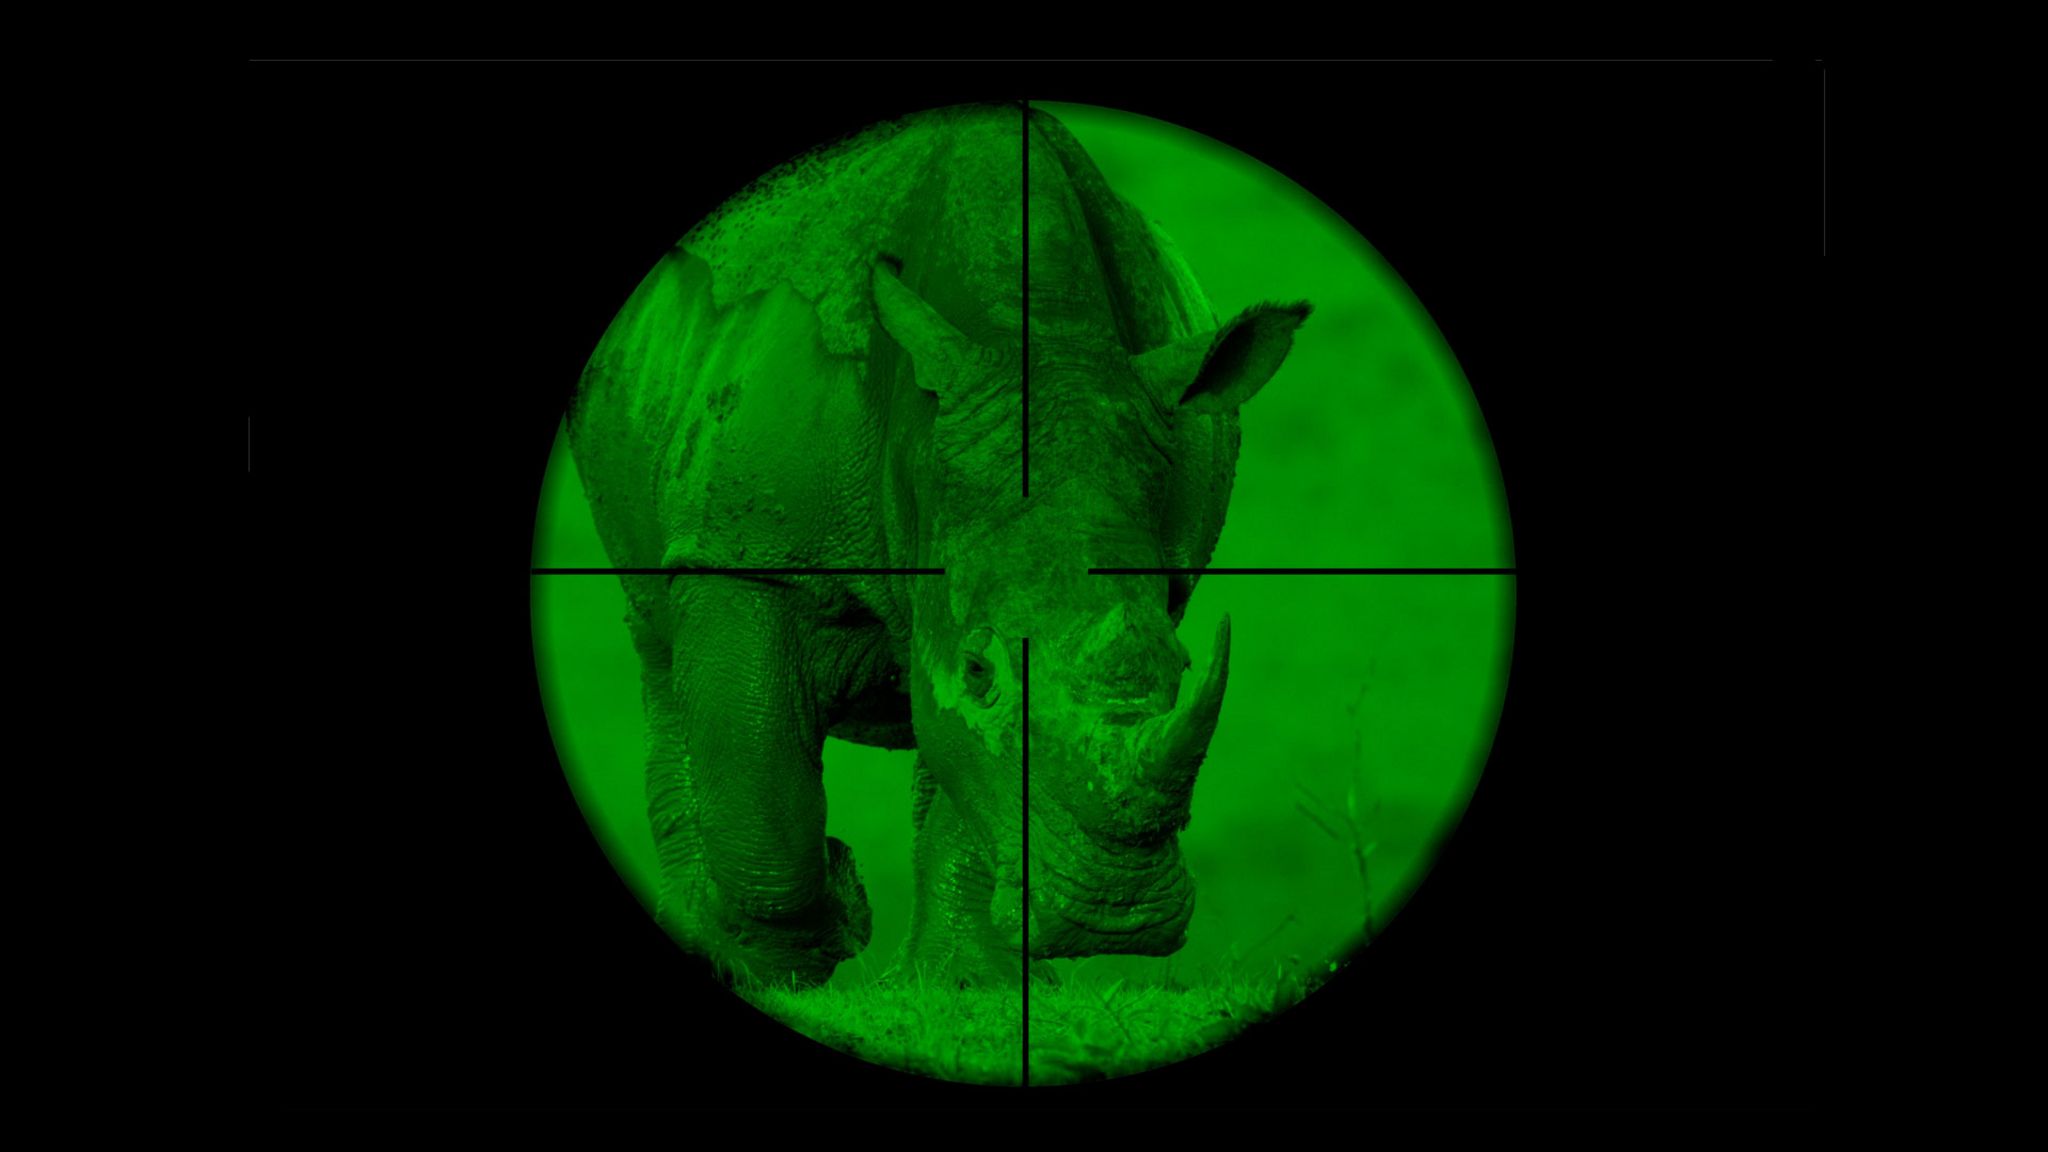 Rhino pictured in crosshairs of a target